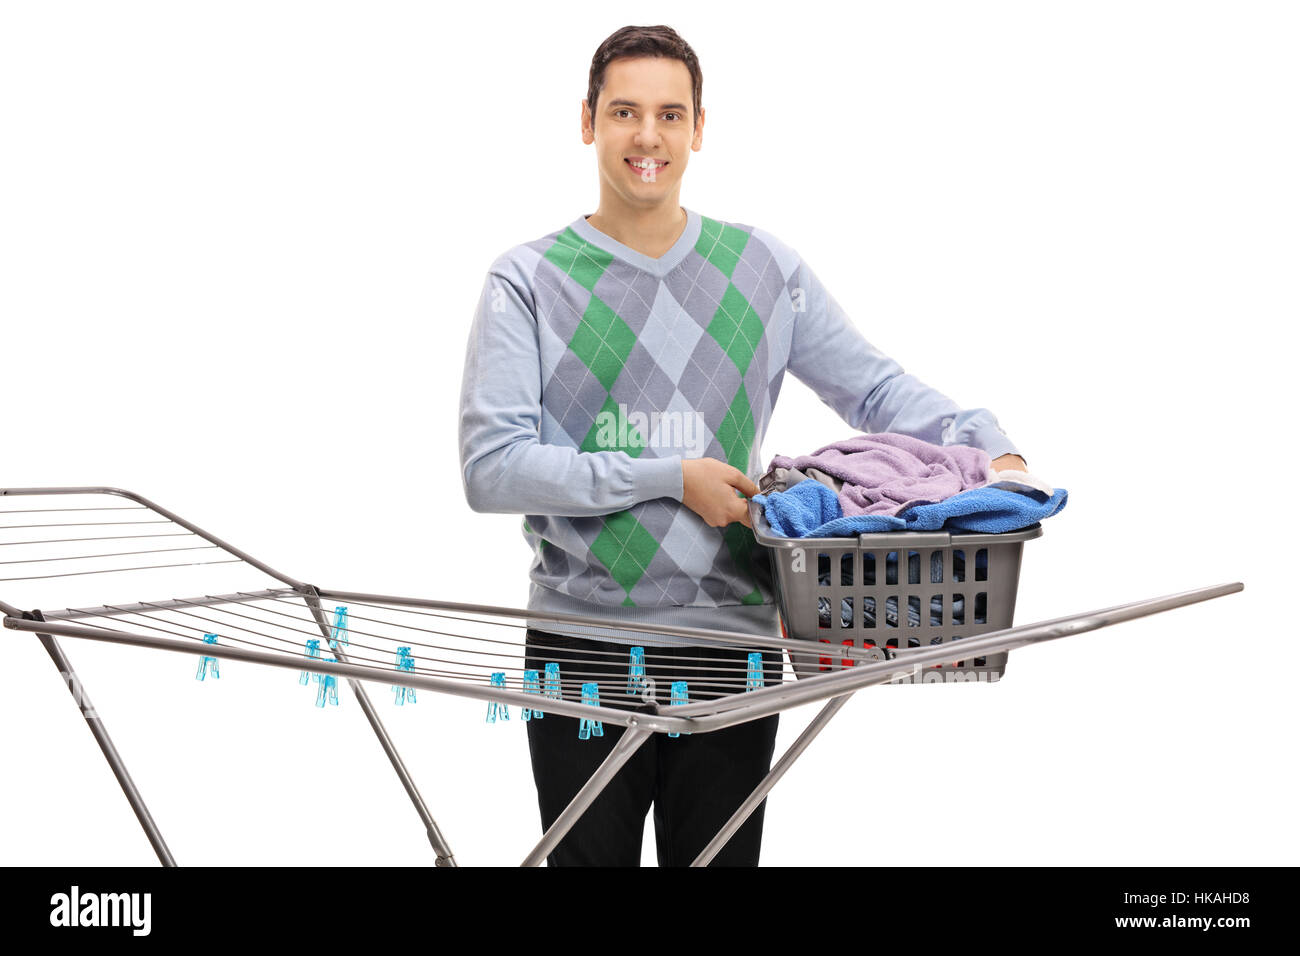 Young man holding a laundry basket full of clothes behind a clothing rack dryer isolated on white background Stock Photo